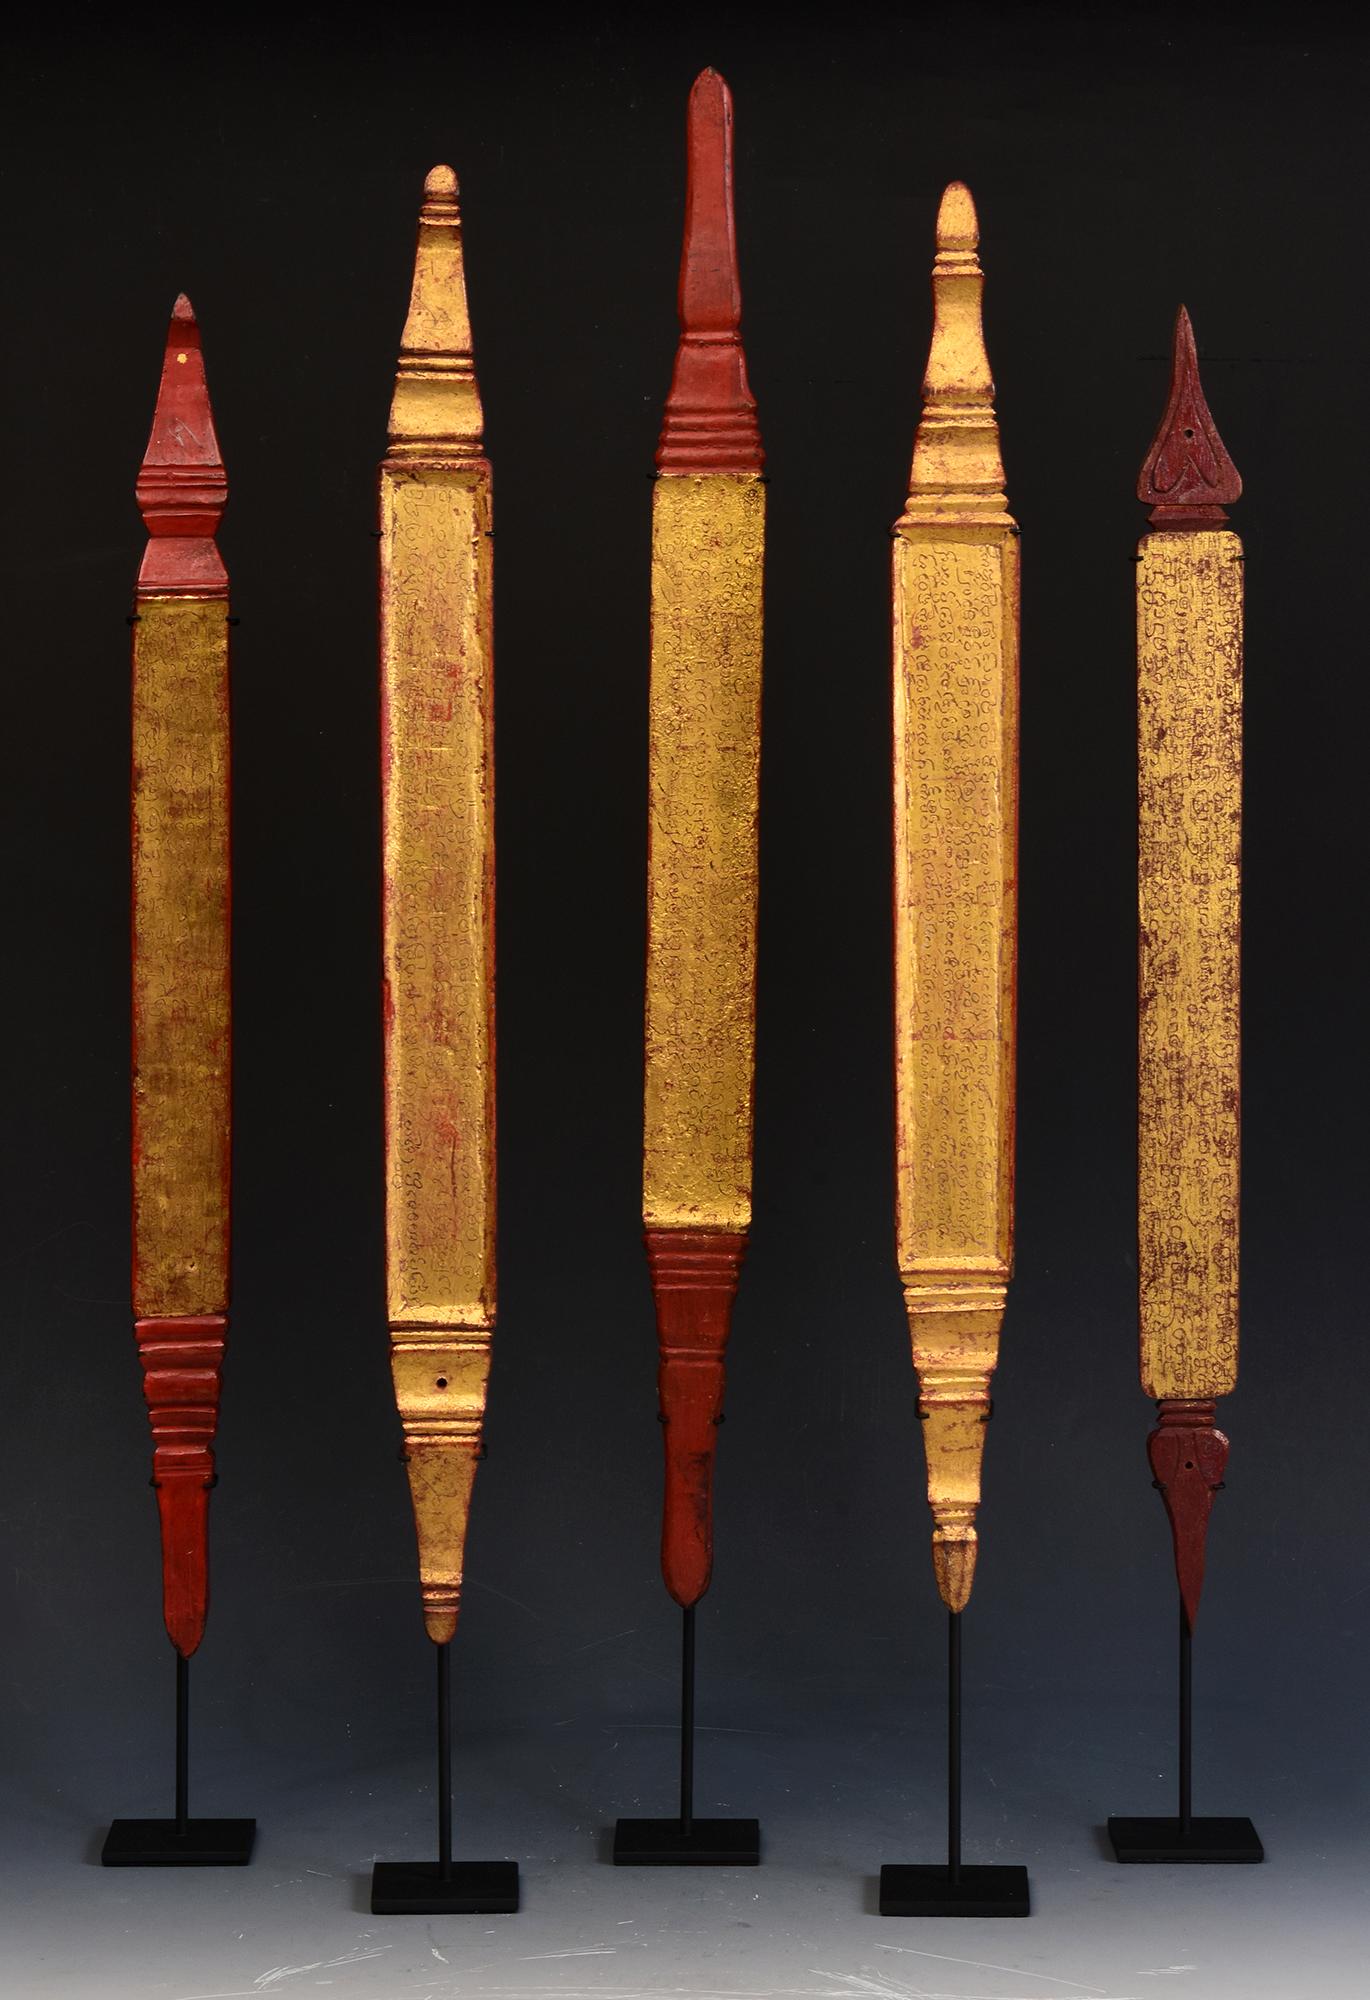 A set of antique Lanna Thai wooden manuscript bookmark with stand.

Age: Thailand, 19th Century
Size of bookmark only: Length 46.5 - 53.4 C.M. / Width 3.6 - 4.1 C.M. / Thickness 1.4 C.M.
Height including stand: 54.3 - 62 C.M.
Condition: Nice